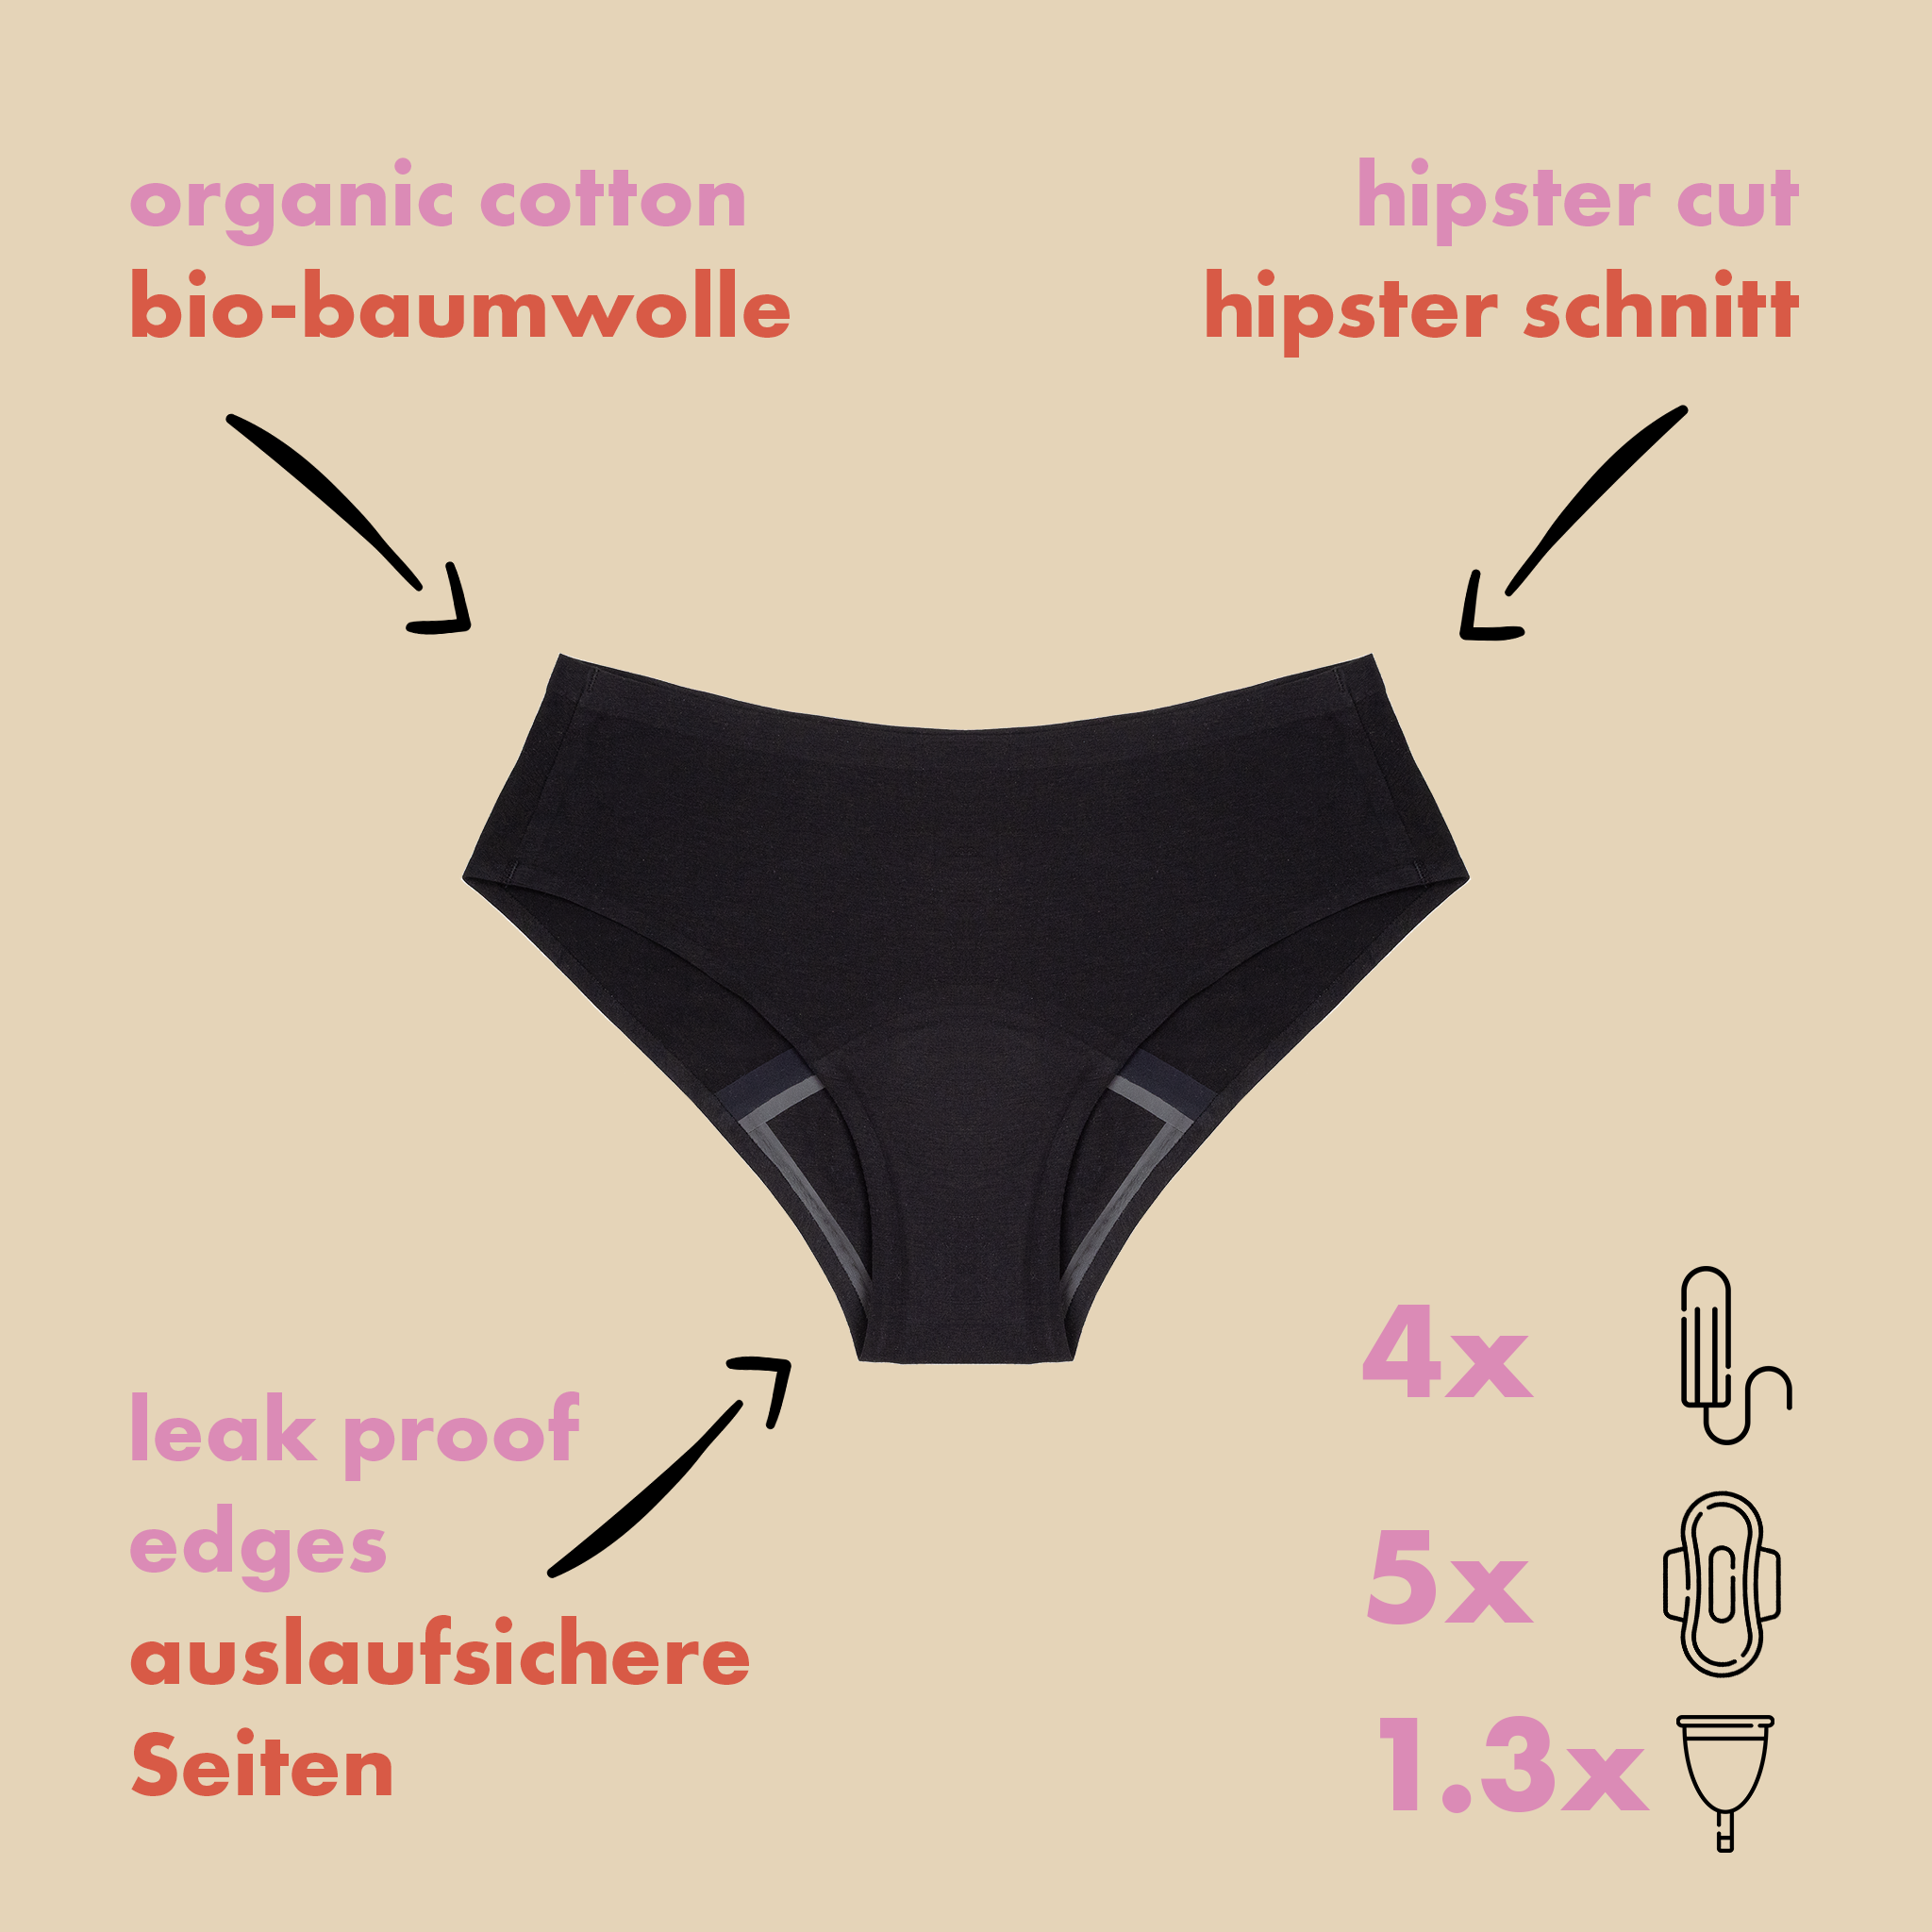 dais period underwear hipster in black with claims of organic cotton, hipster cut, leak proof edges and super absorbency of up to 4 tampons of blood. 